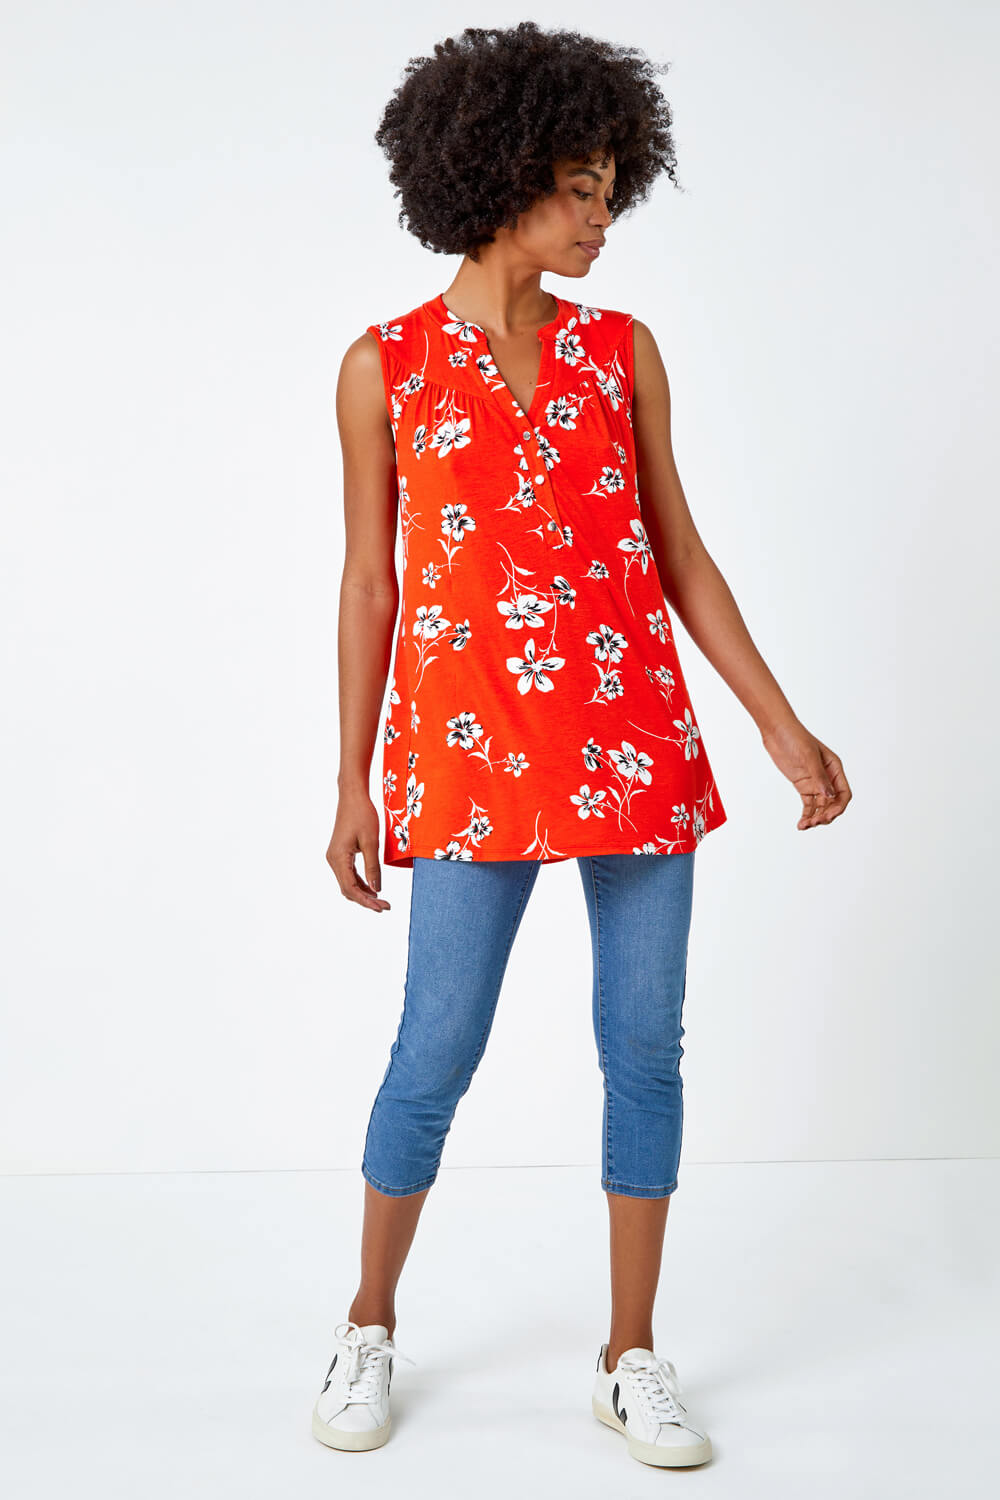 Red Sleeveless Floral Print Top, Image 2 of 5